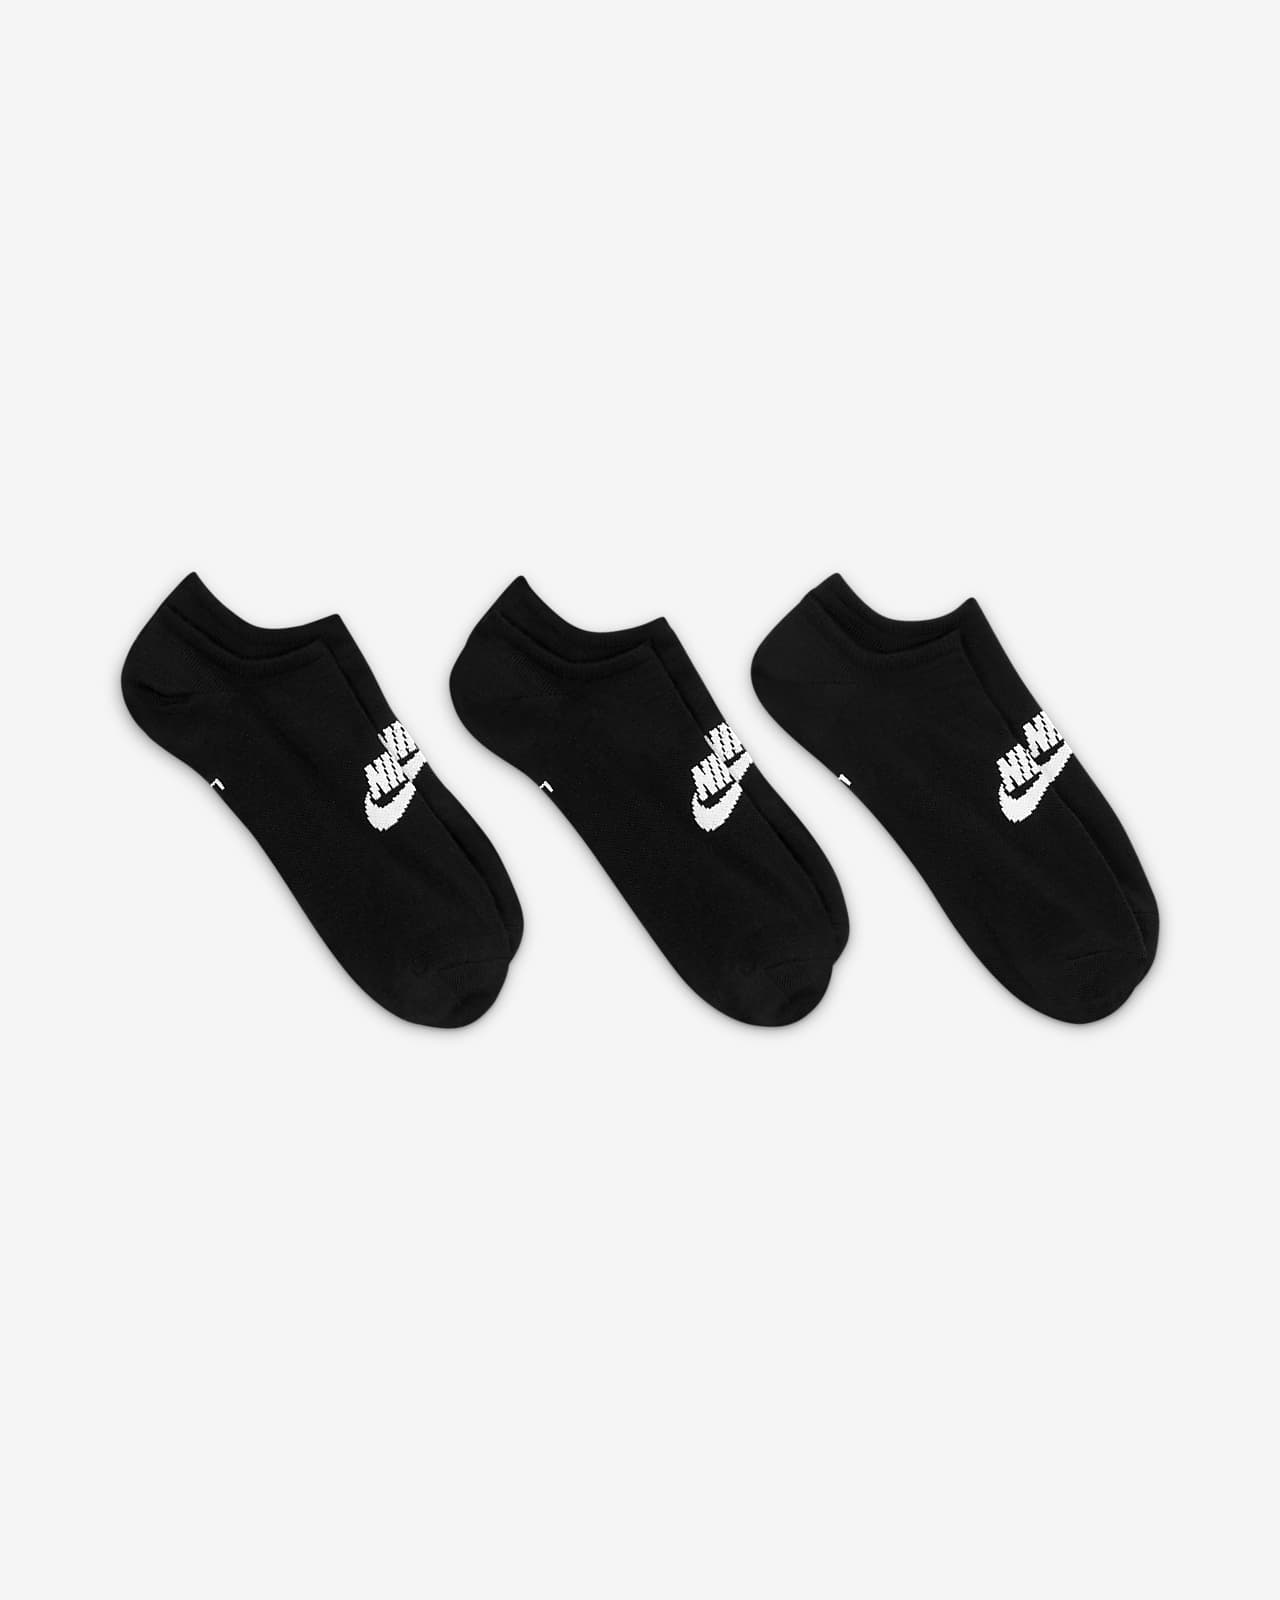 Custom Print the Bottoms of No Show Socks in 3 Sizes